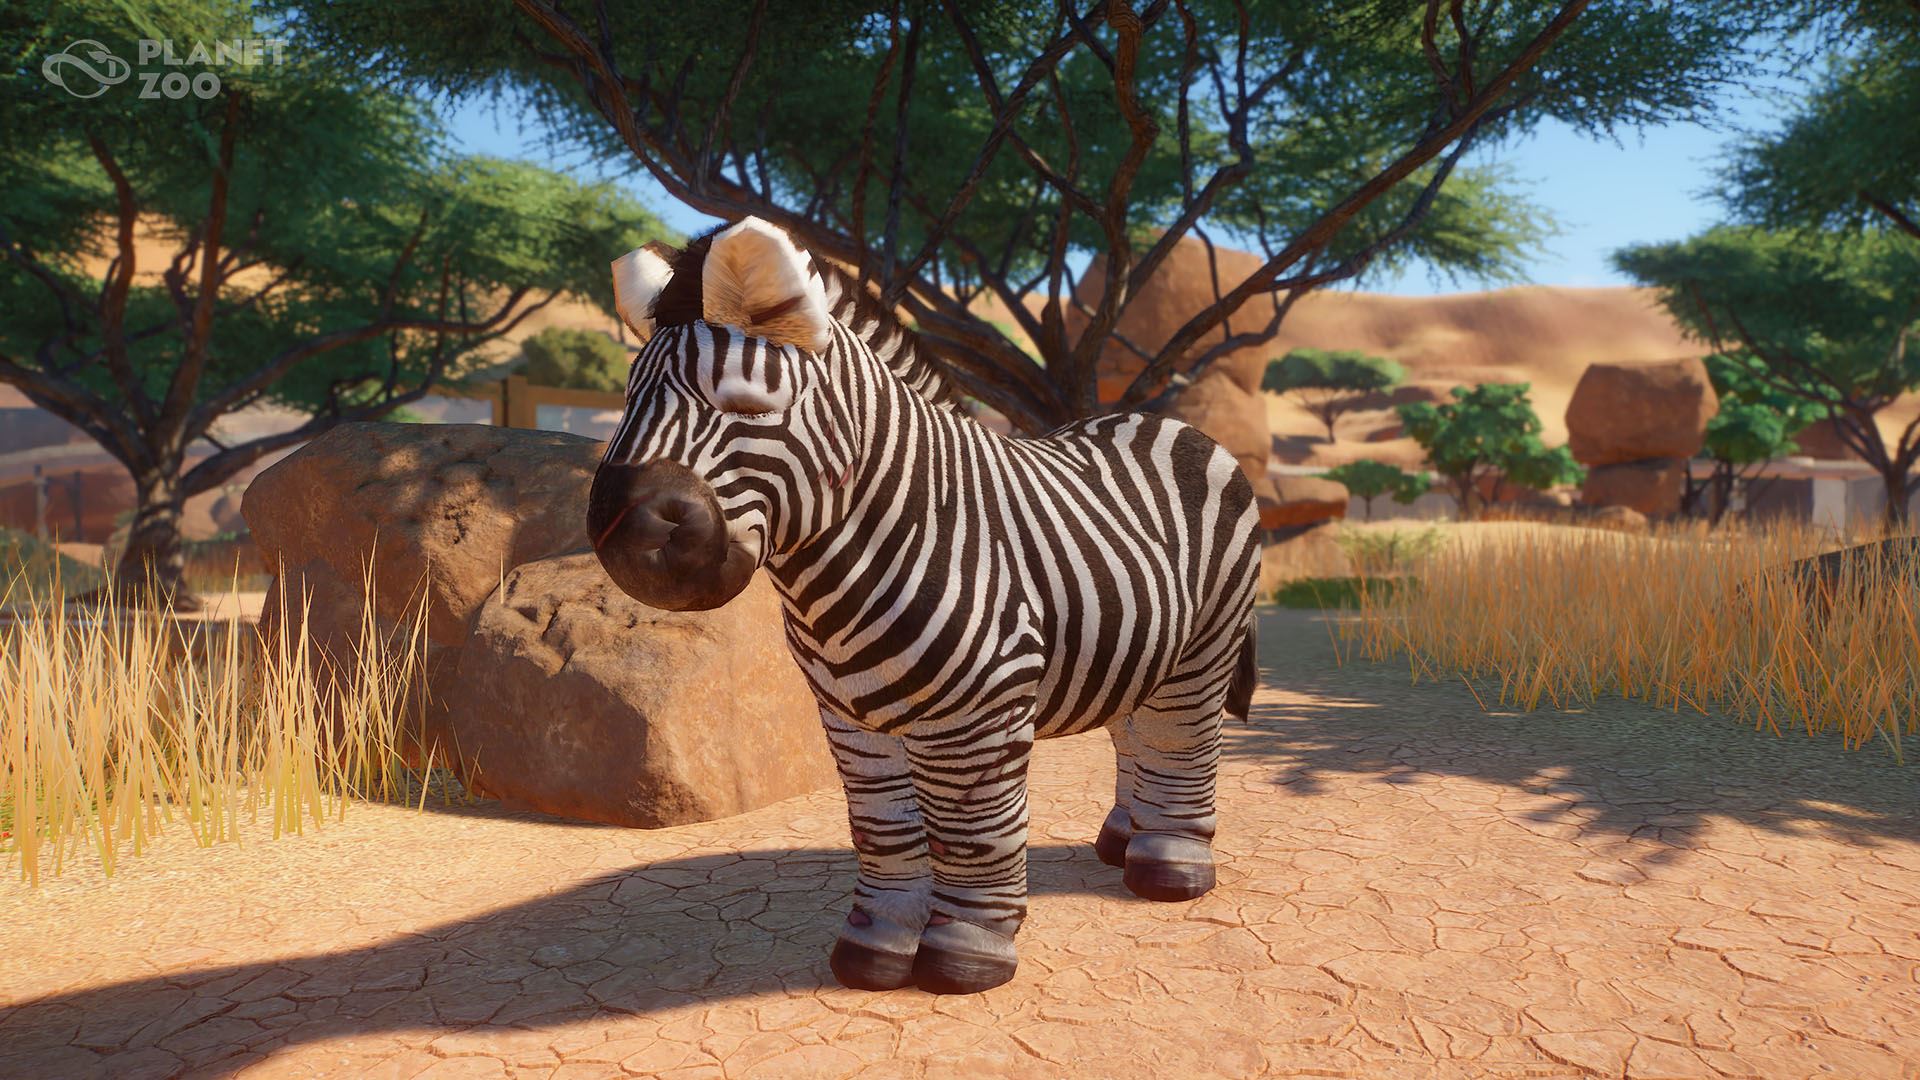 download planet zoo animal for free